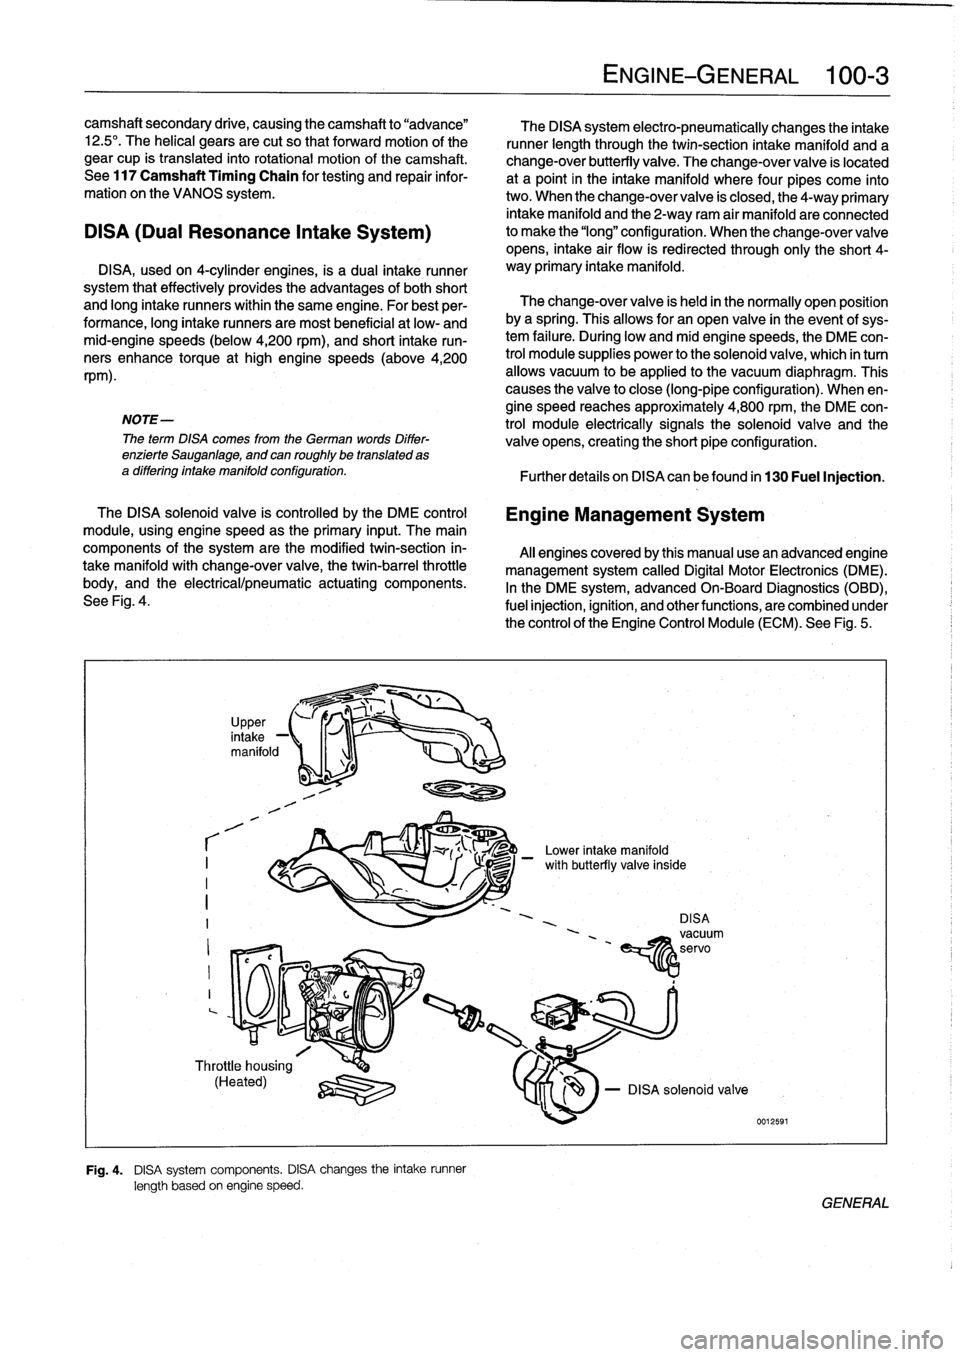 BMW 318i 1997 E36 Workshop Manual camshaft
secondary
drive,
causing
thecamshaft
to
"advance"

12
.5°
.
The
helical
gears
are
cut
so
that
forward
motion
of
the

gear
cup
is
transiated
into
rotational
motion
of
the
camshaft
.

See
117
